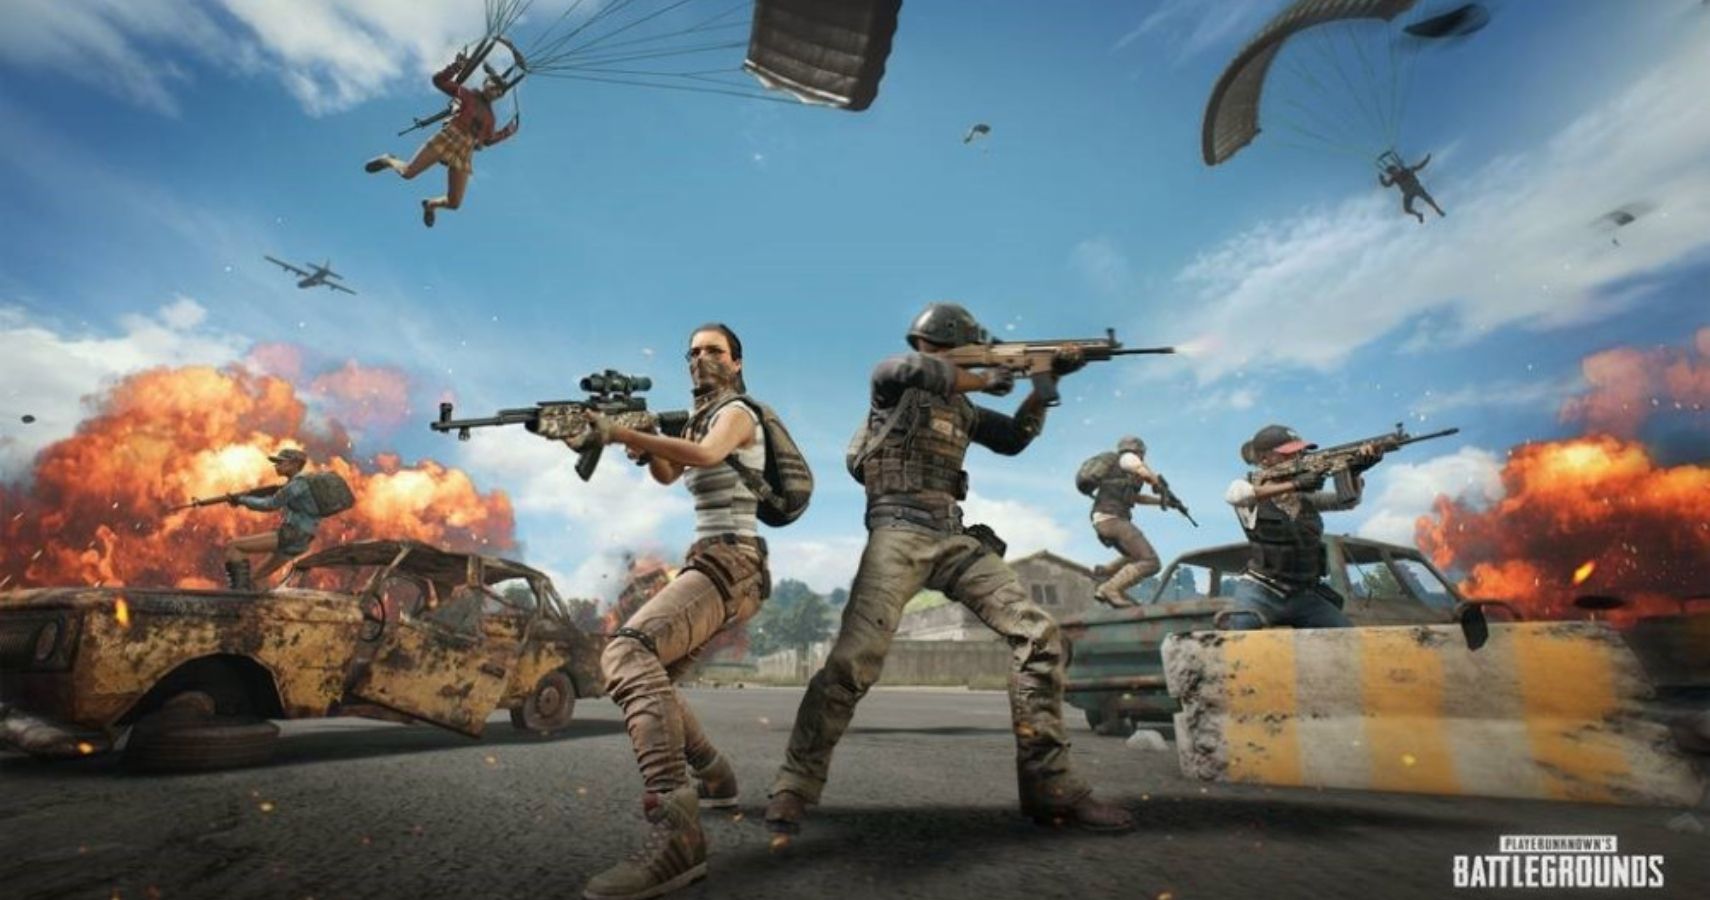 The history of PlayerUnknown's Battlegrounds